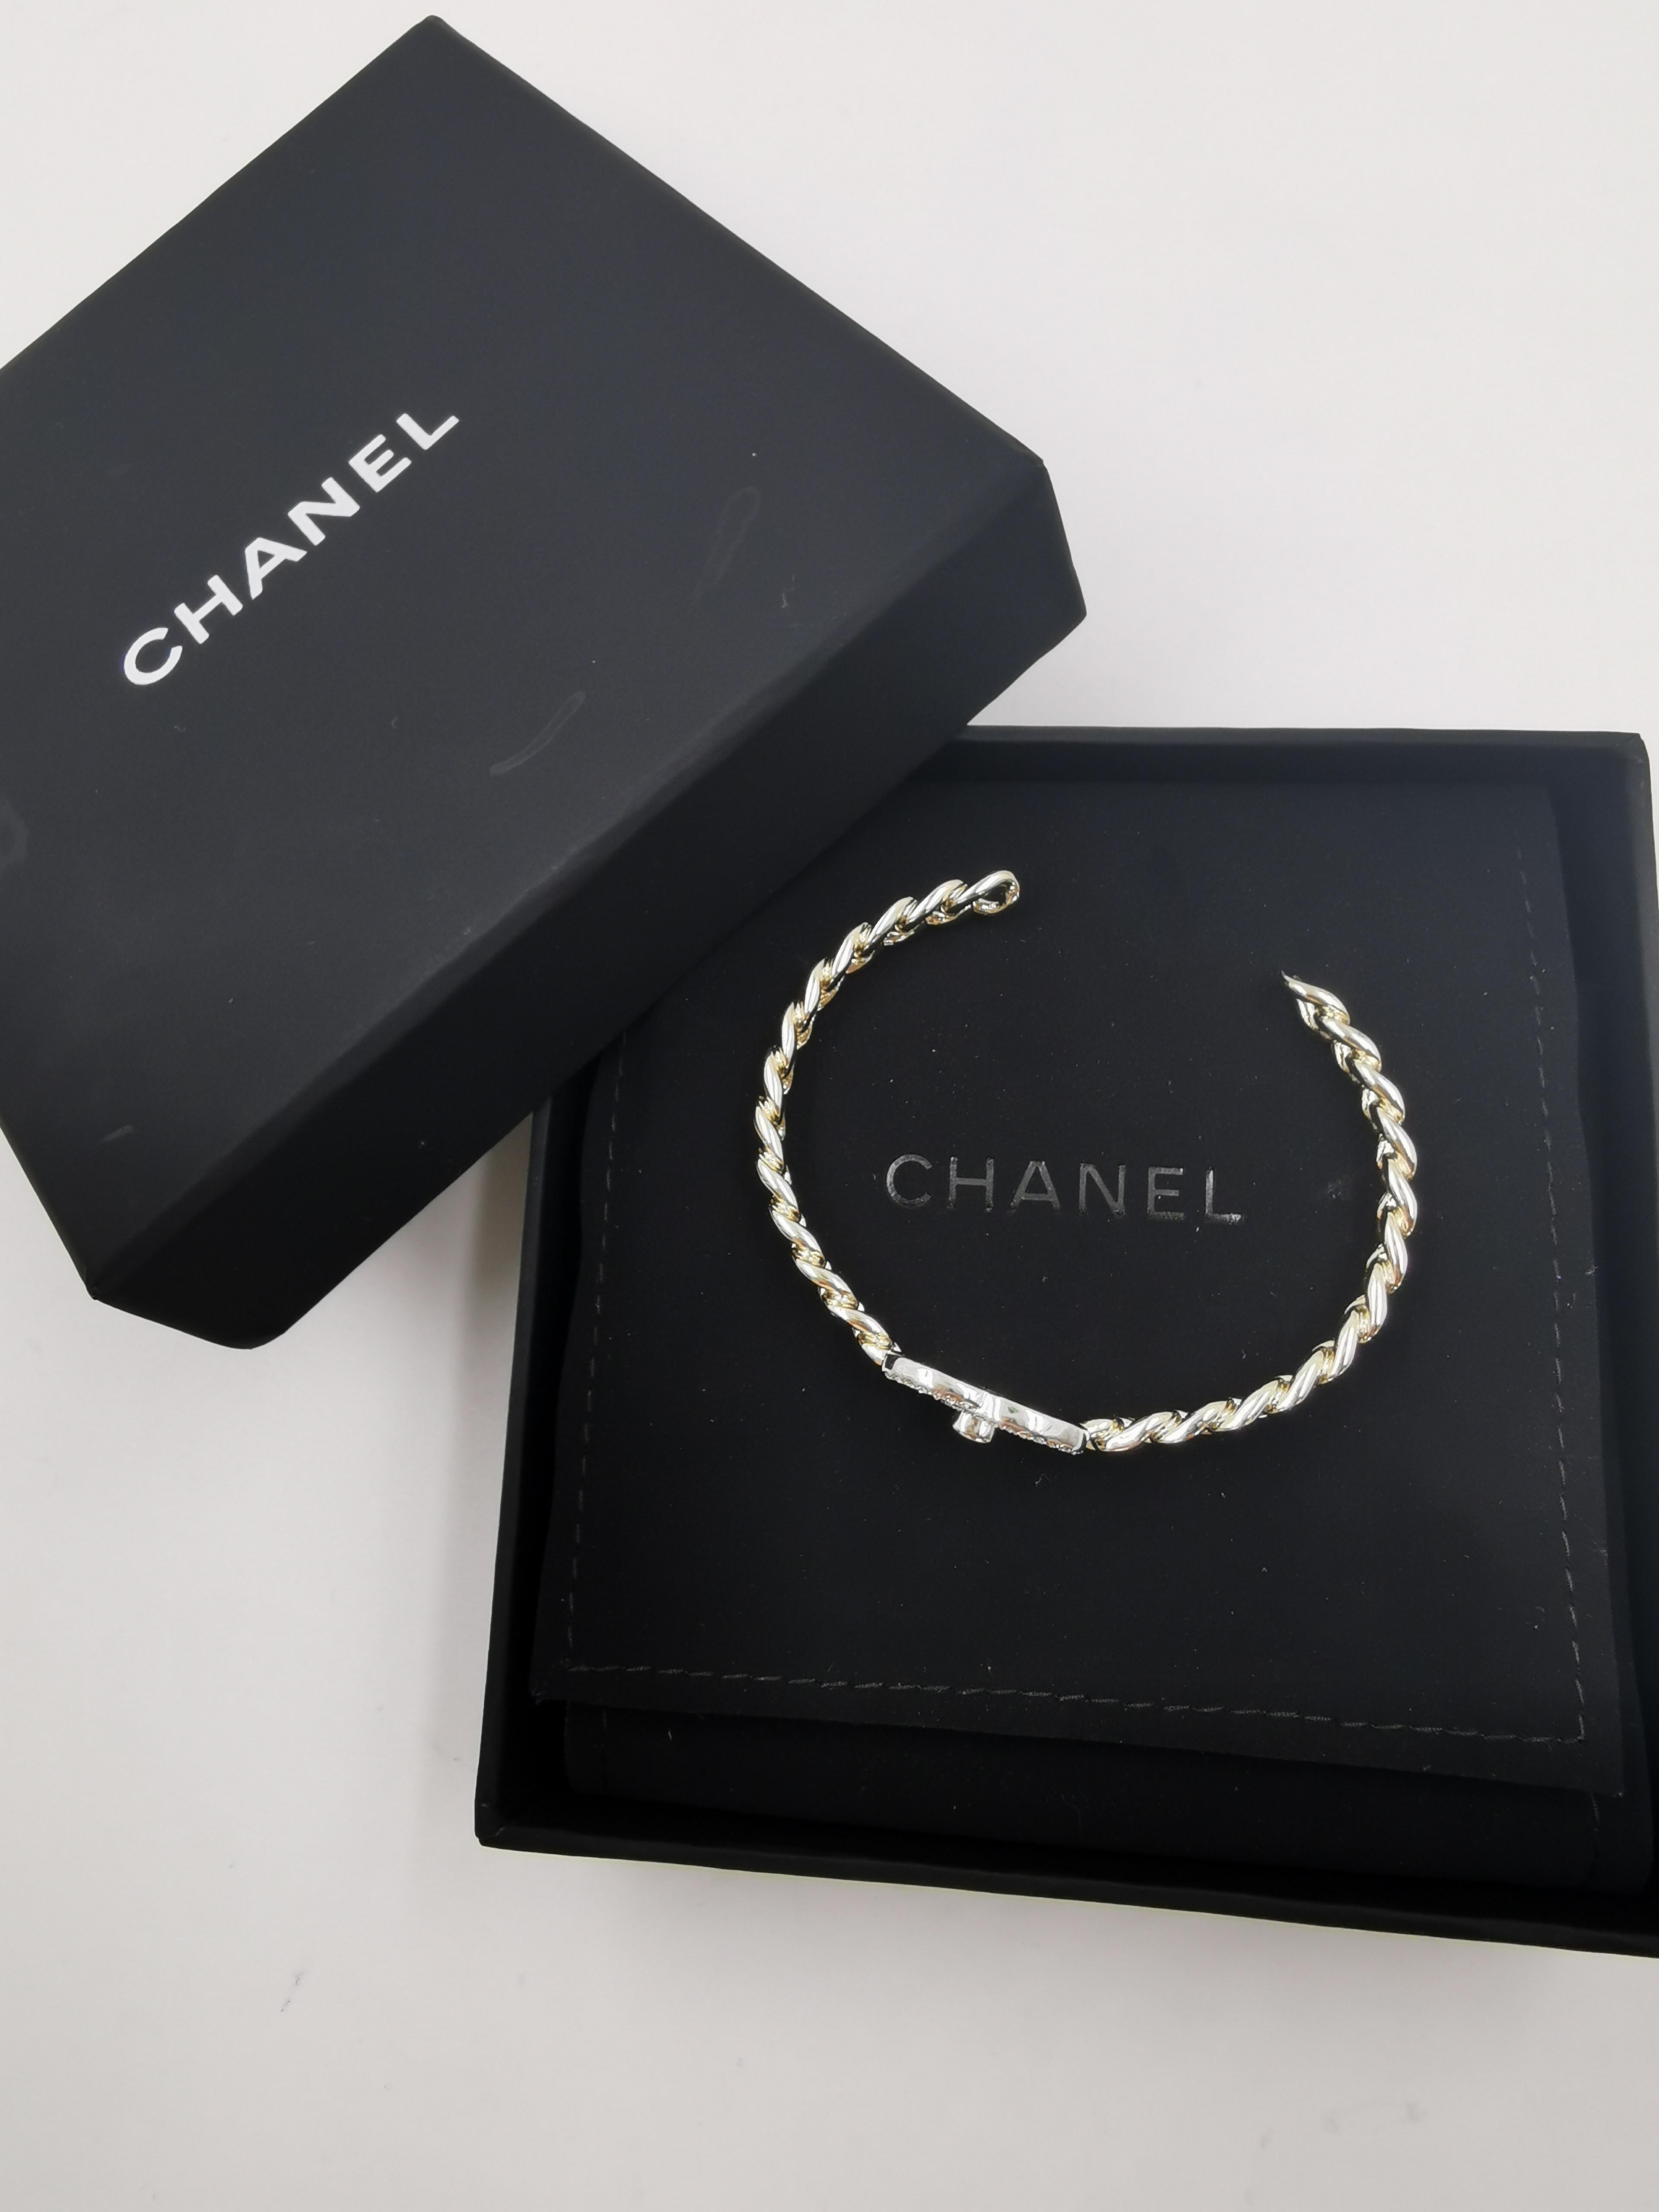 Chanel current season Turnlock Cuff, Excellent condition in box. Fully adjustable.

Feature
Material: Metal
Condition: Excellent
Colour: Silver